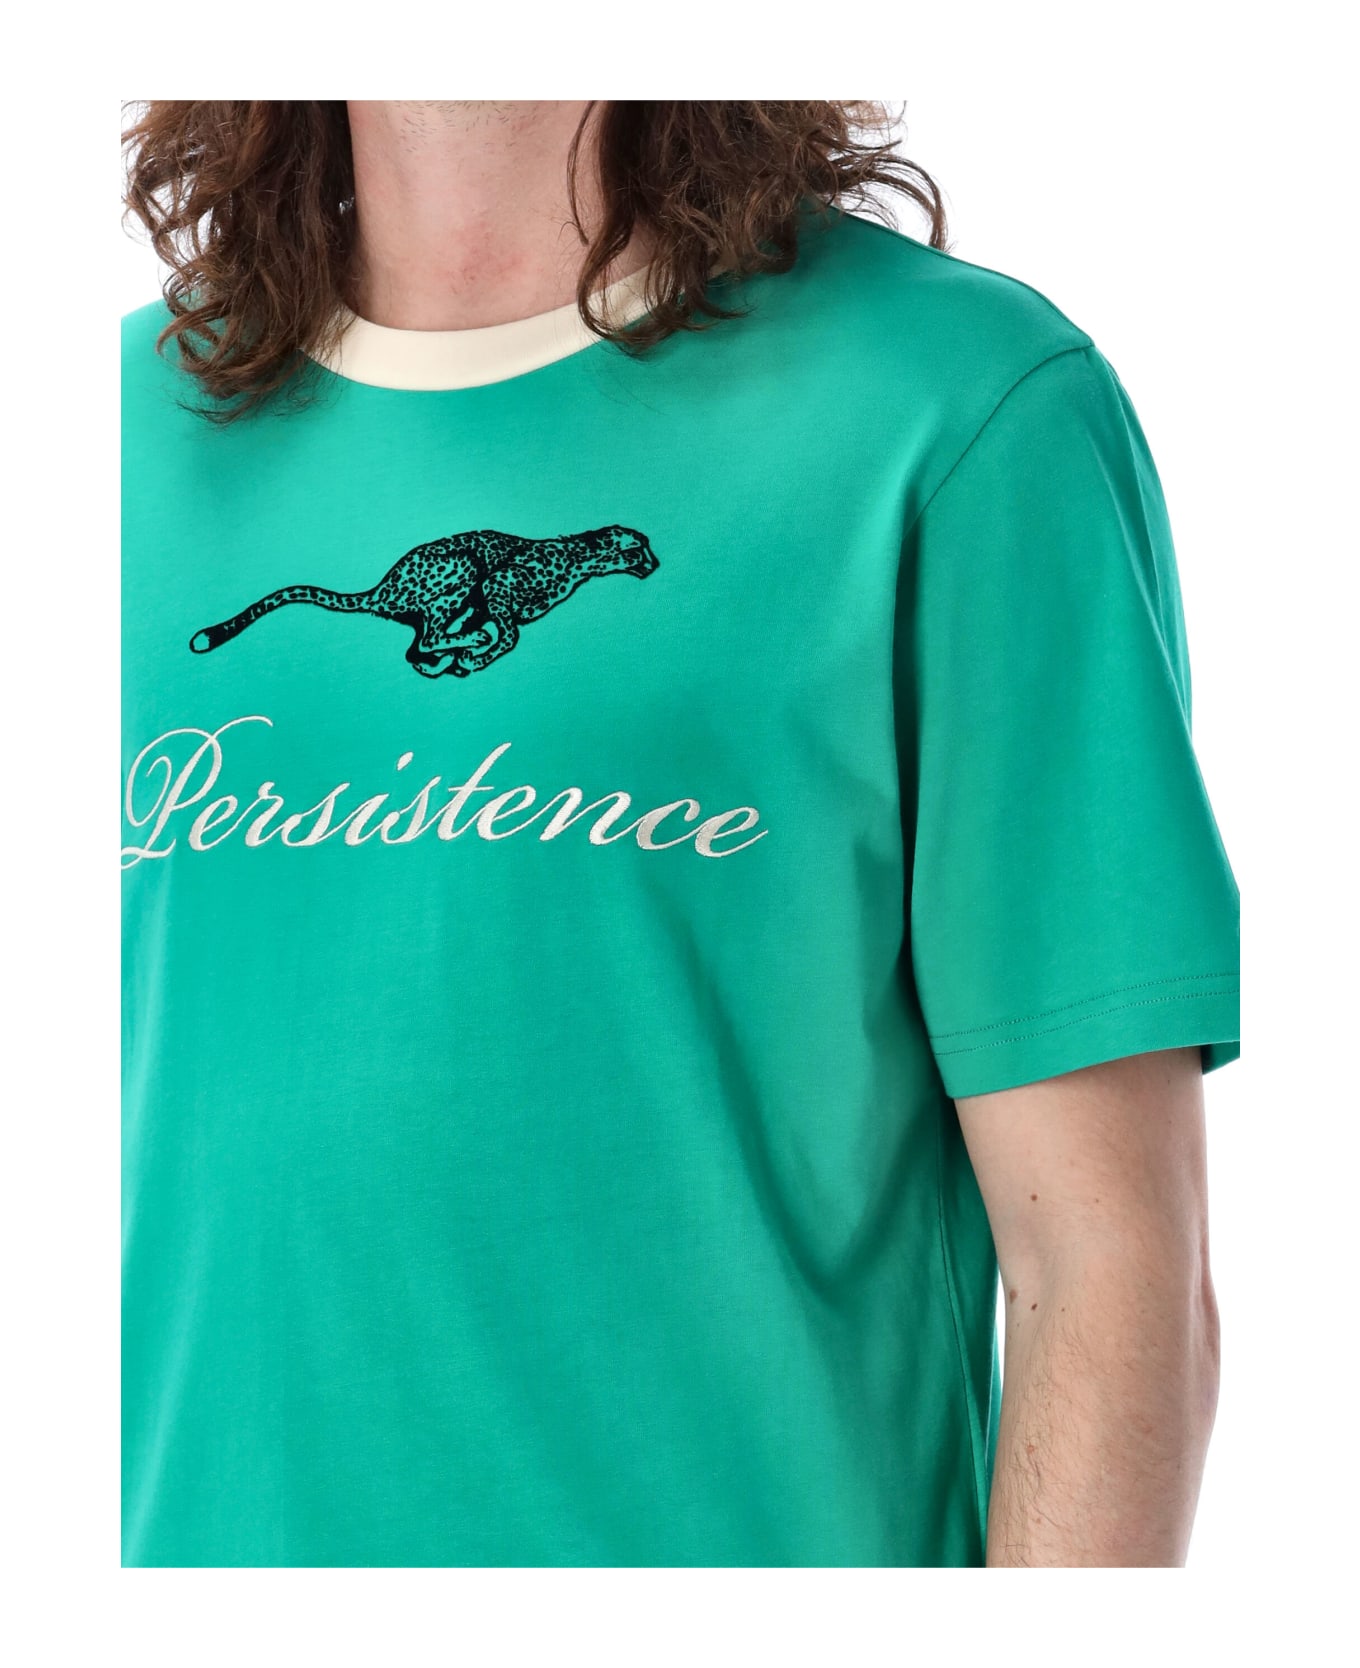 Wales Bonner Resilience T-shirt - GREEN シャツ